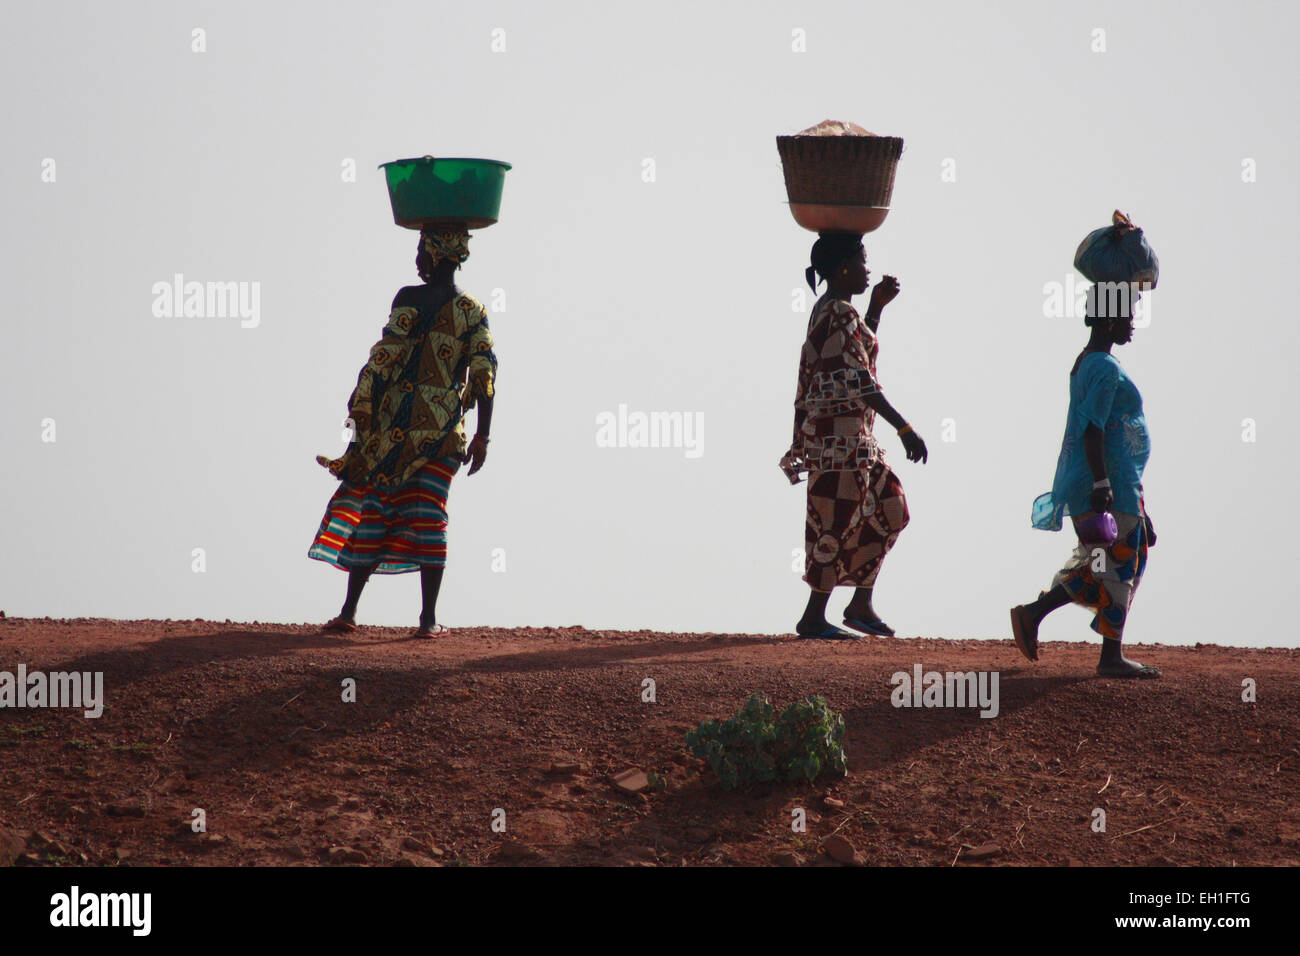 SANGA, MALI - SEPTEMBER 29 , 2008:  Unidentified women from village in Dogon country Stock Photo